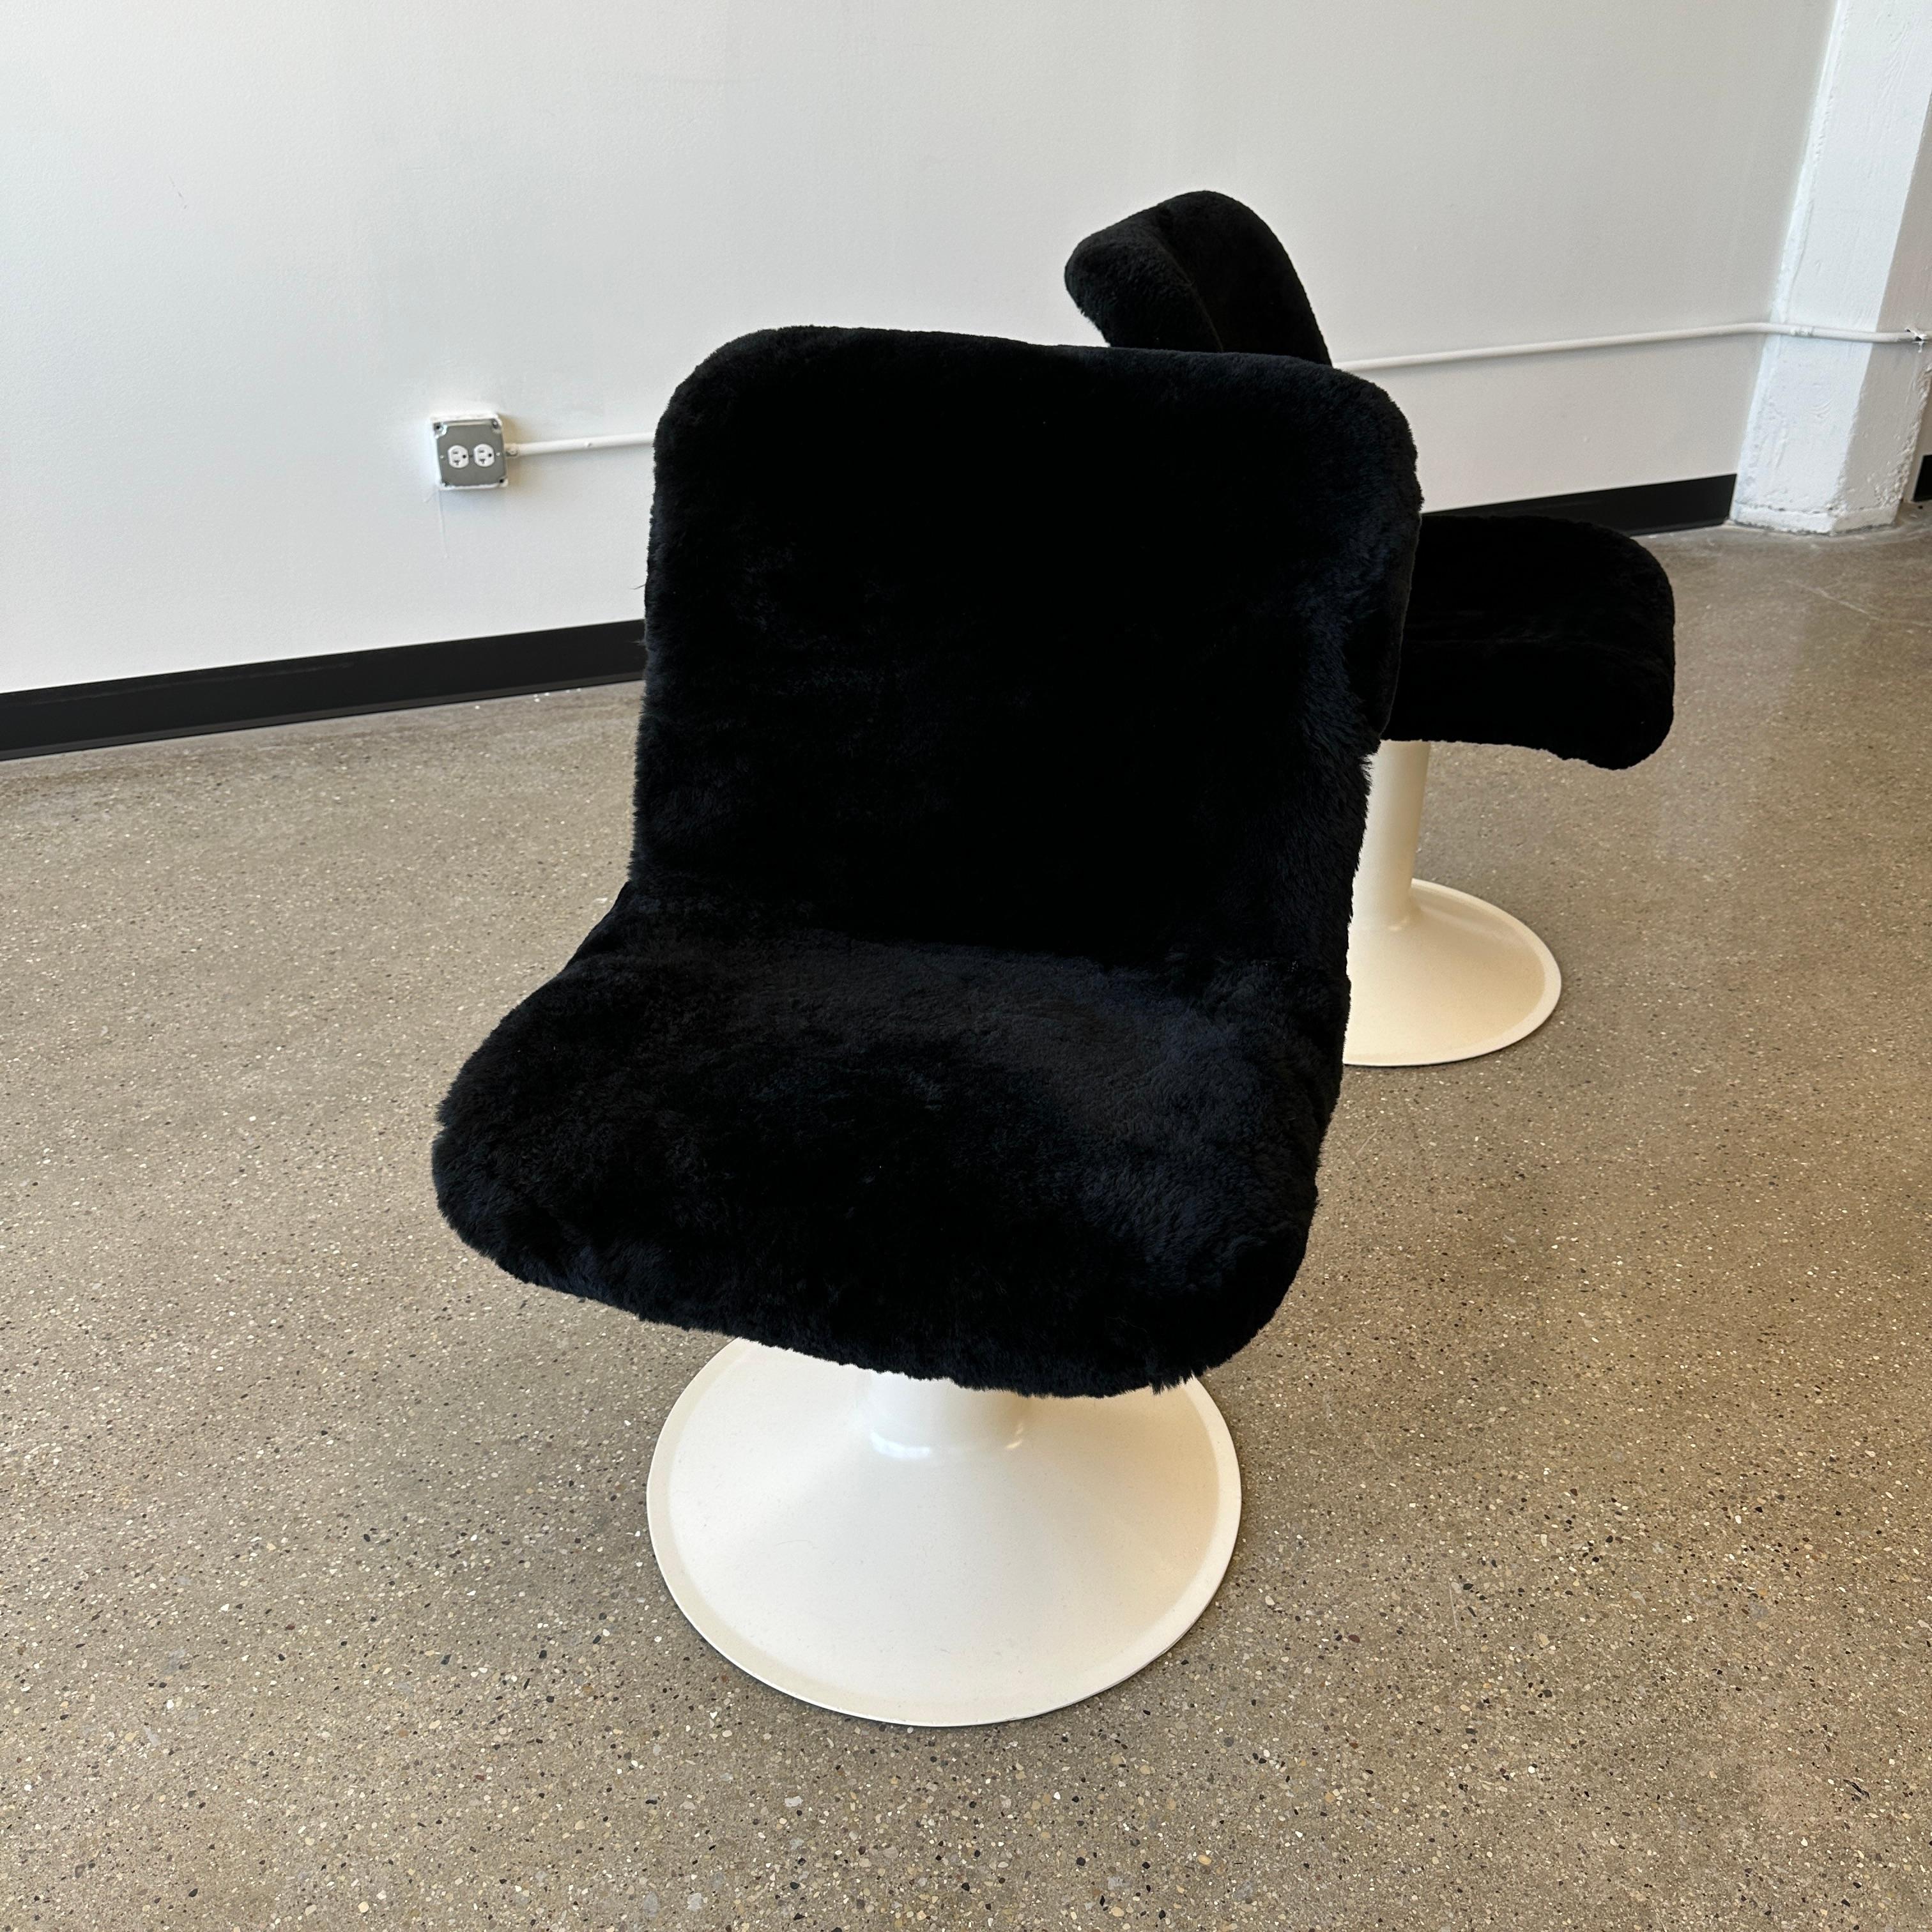 Model number 415 for Haimi c. 1960s, Finland. Both the bases and seats have been fully restored although there is still some vintage wear left on the frames. These have been redone in a lovely black shearling that adds significant cushioning and